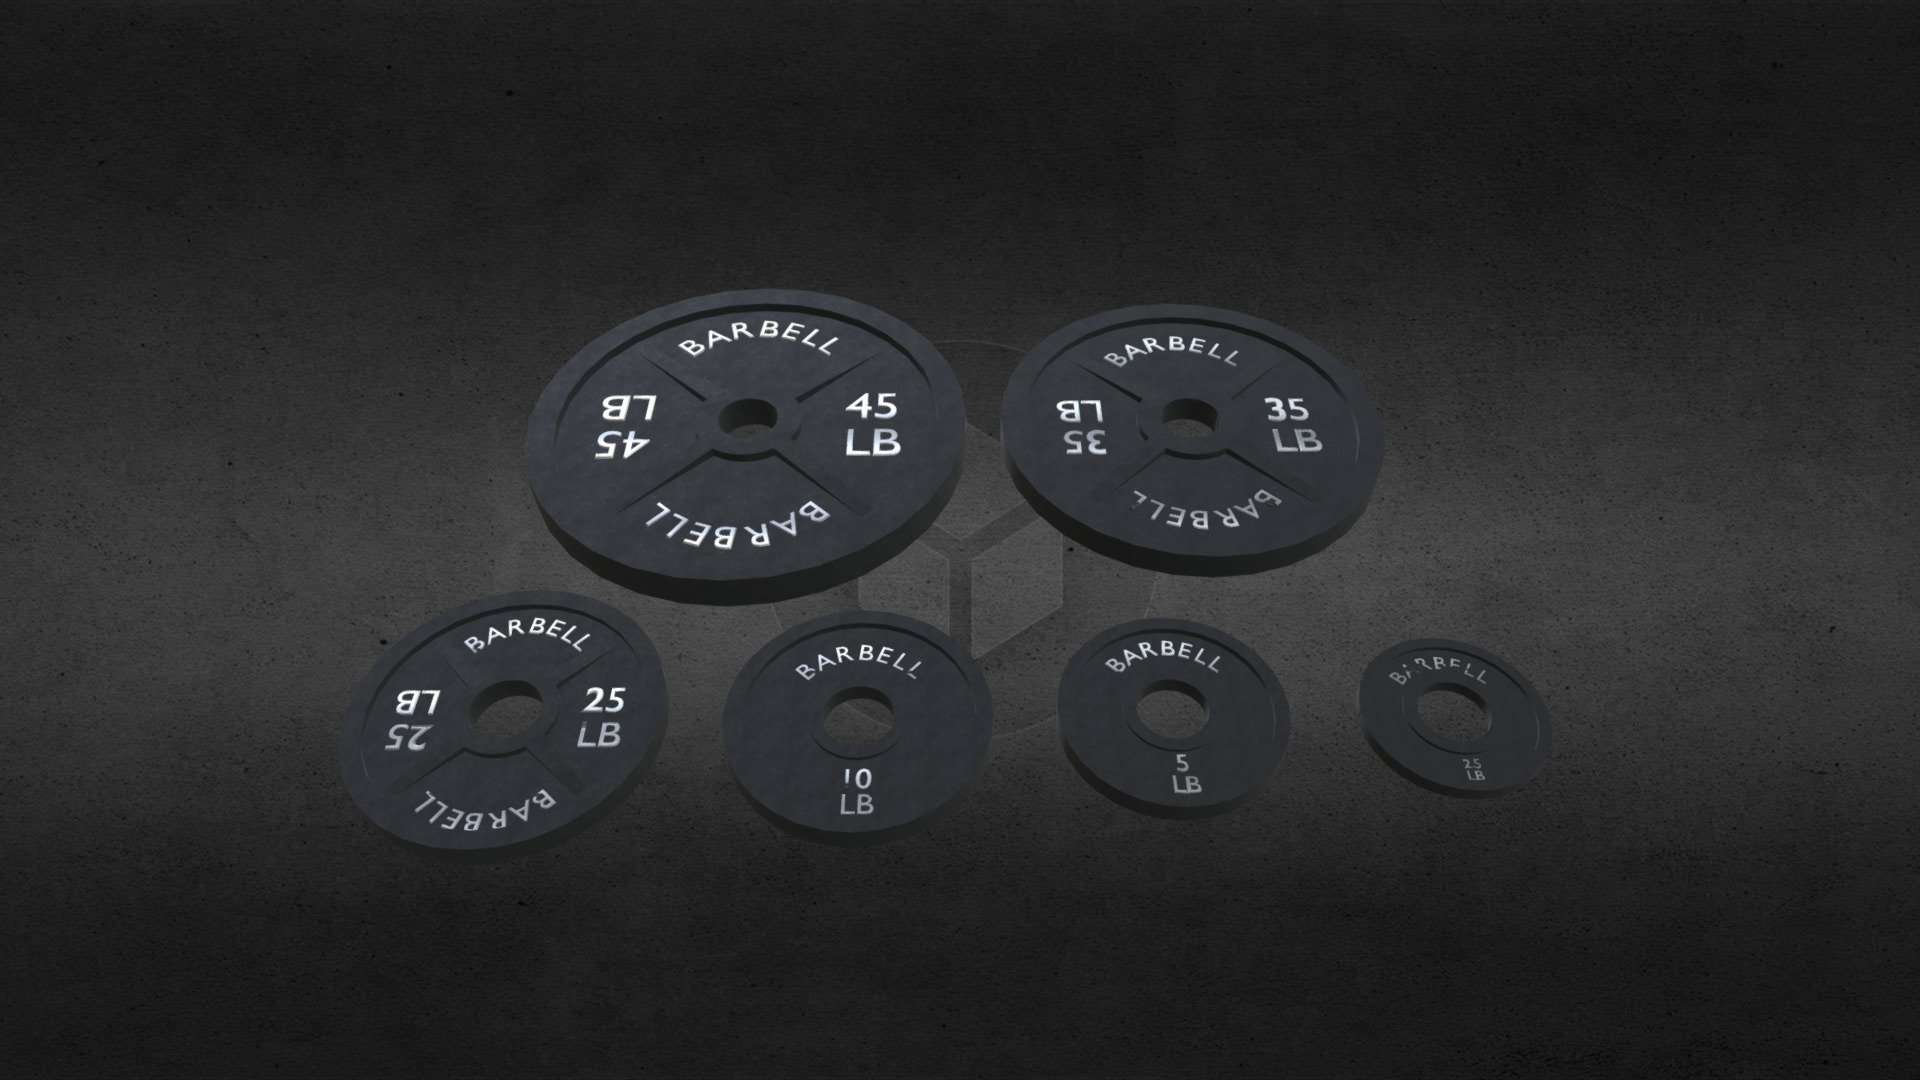 Weight Lifting Plates Blender
Weights for Gym scene in back ground of video and video games 3d model